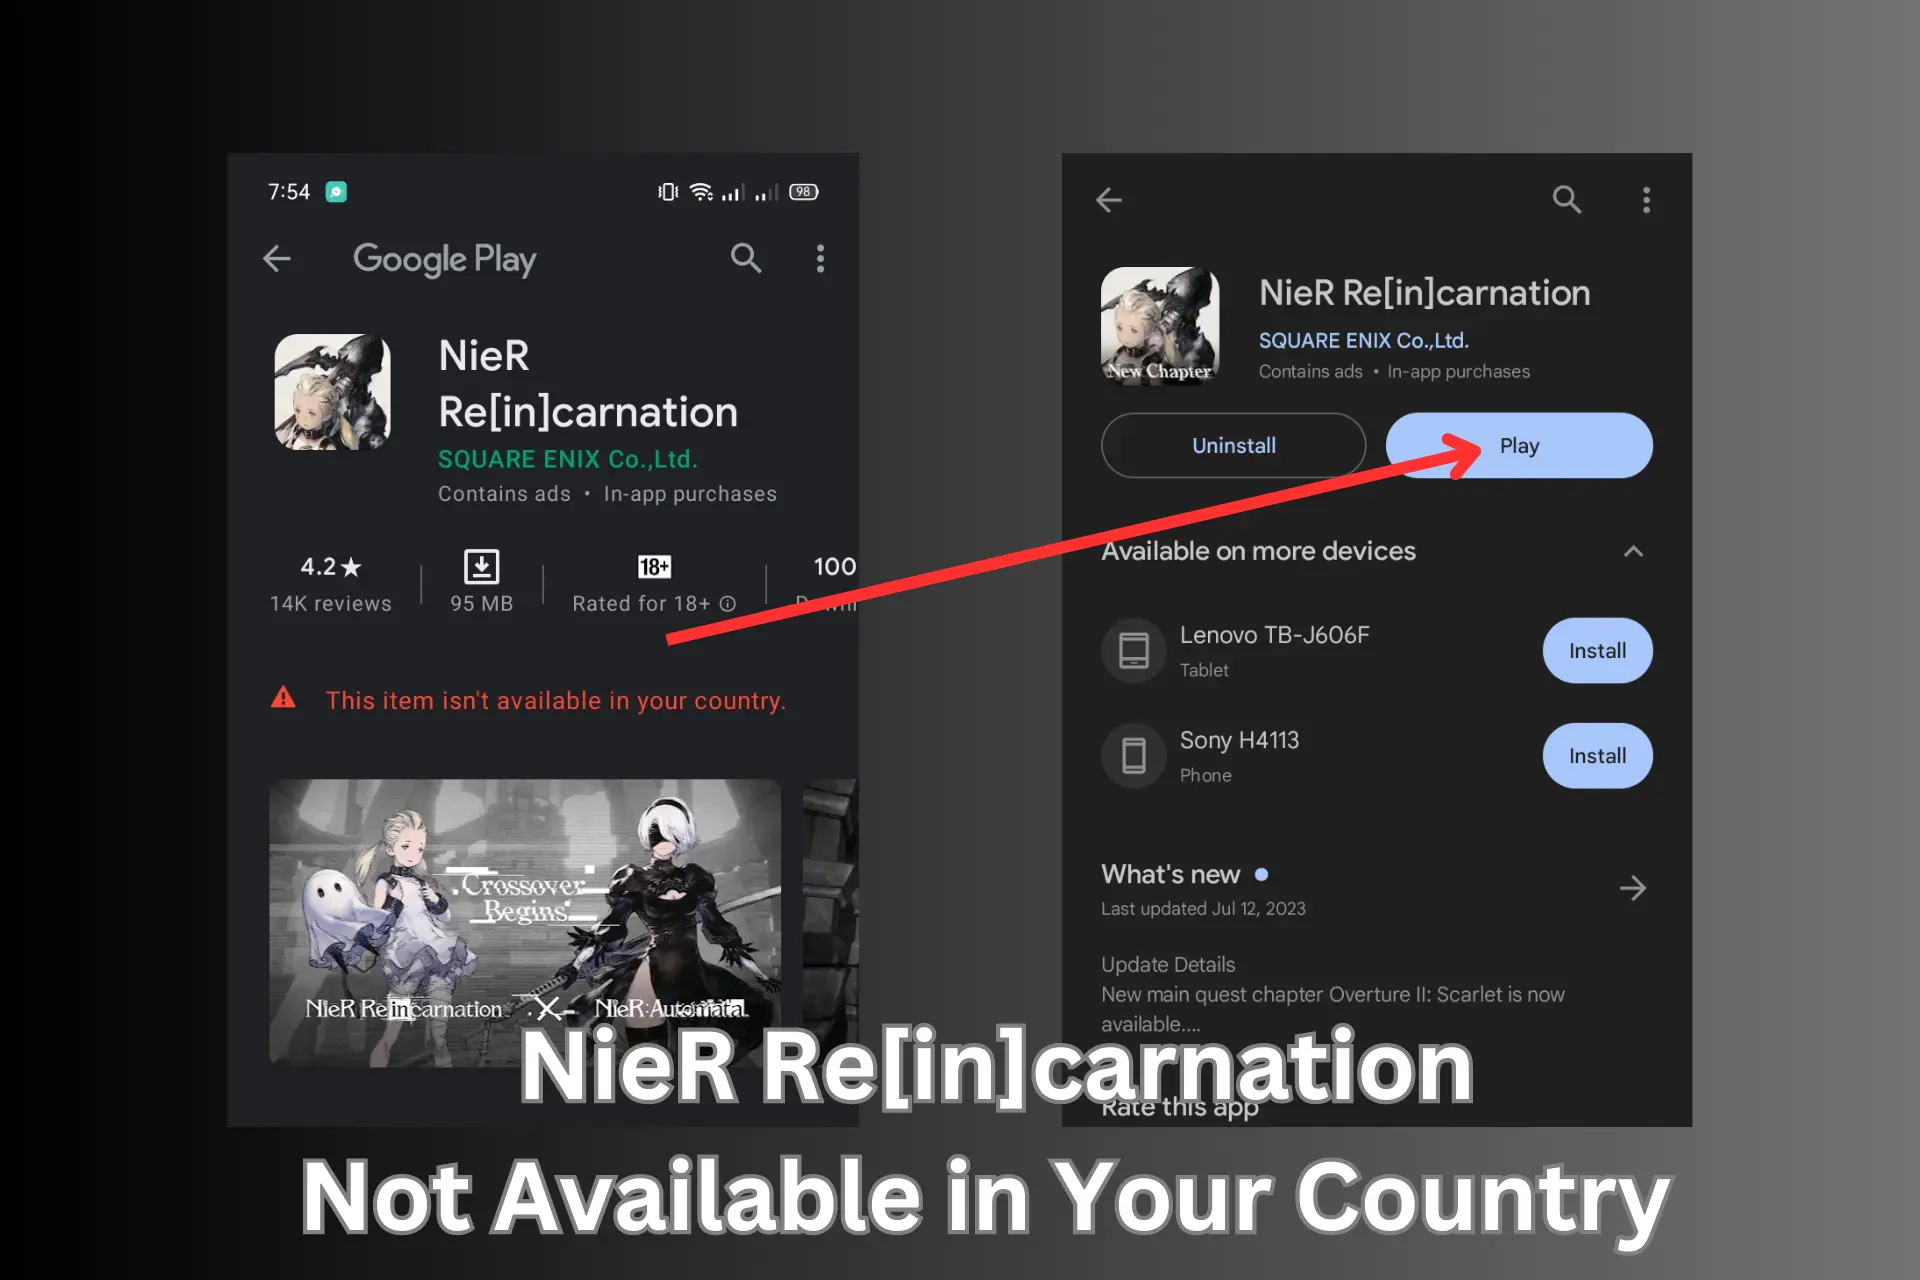 NieR Reincarnation Not Available in Your Country